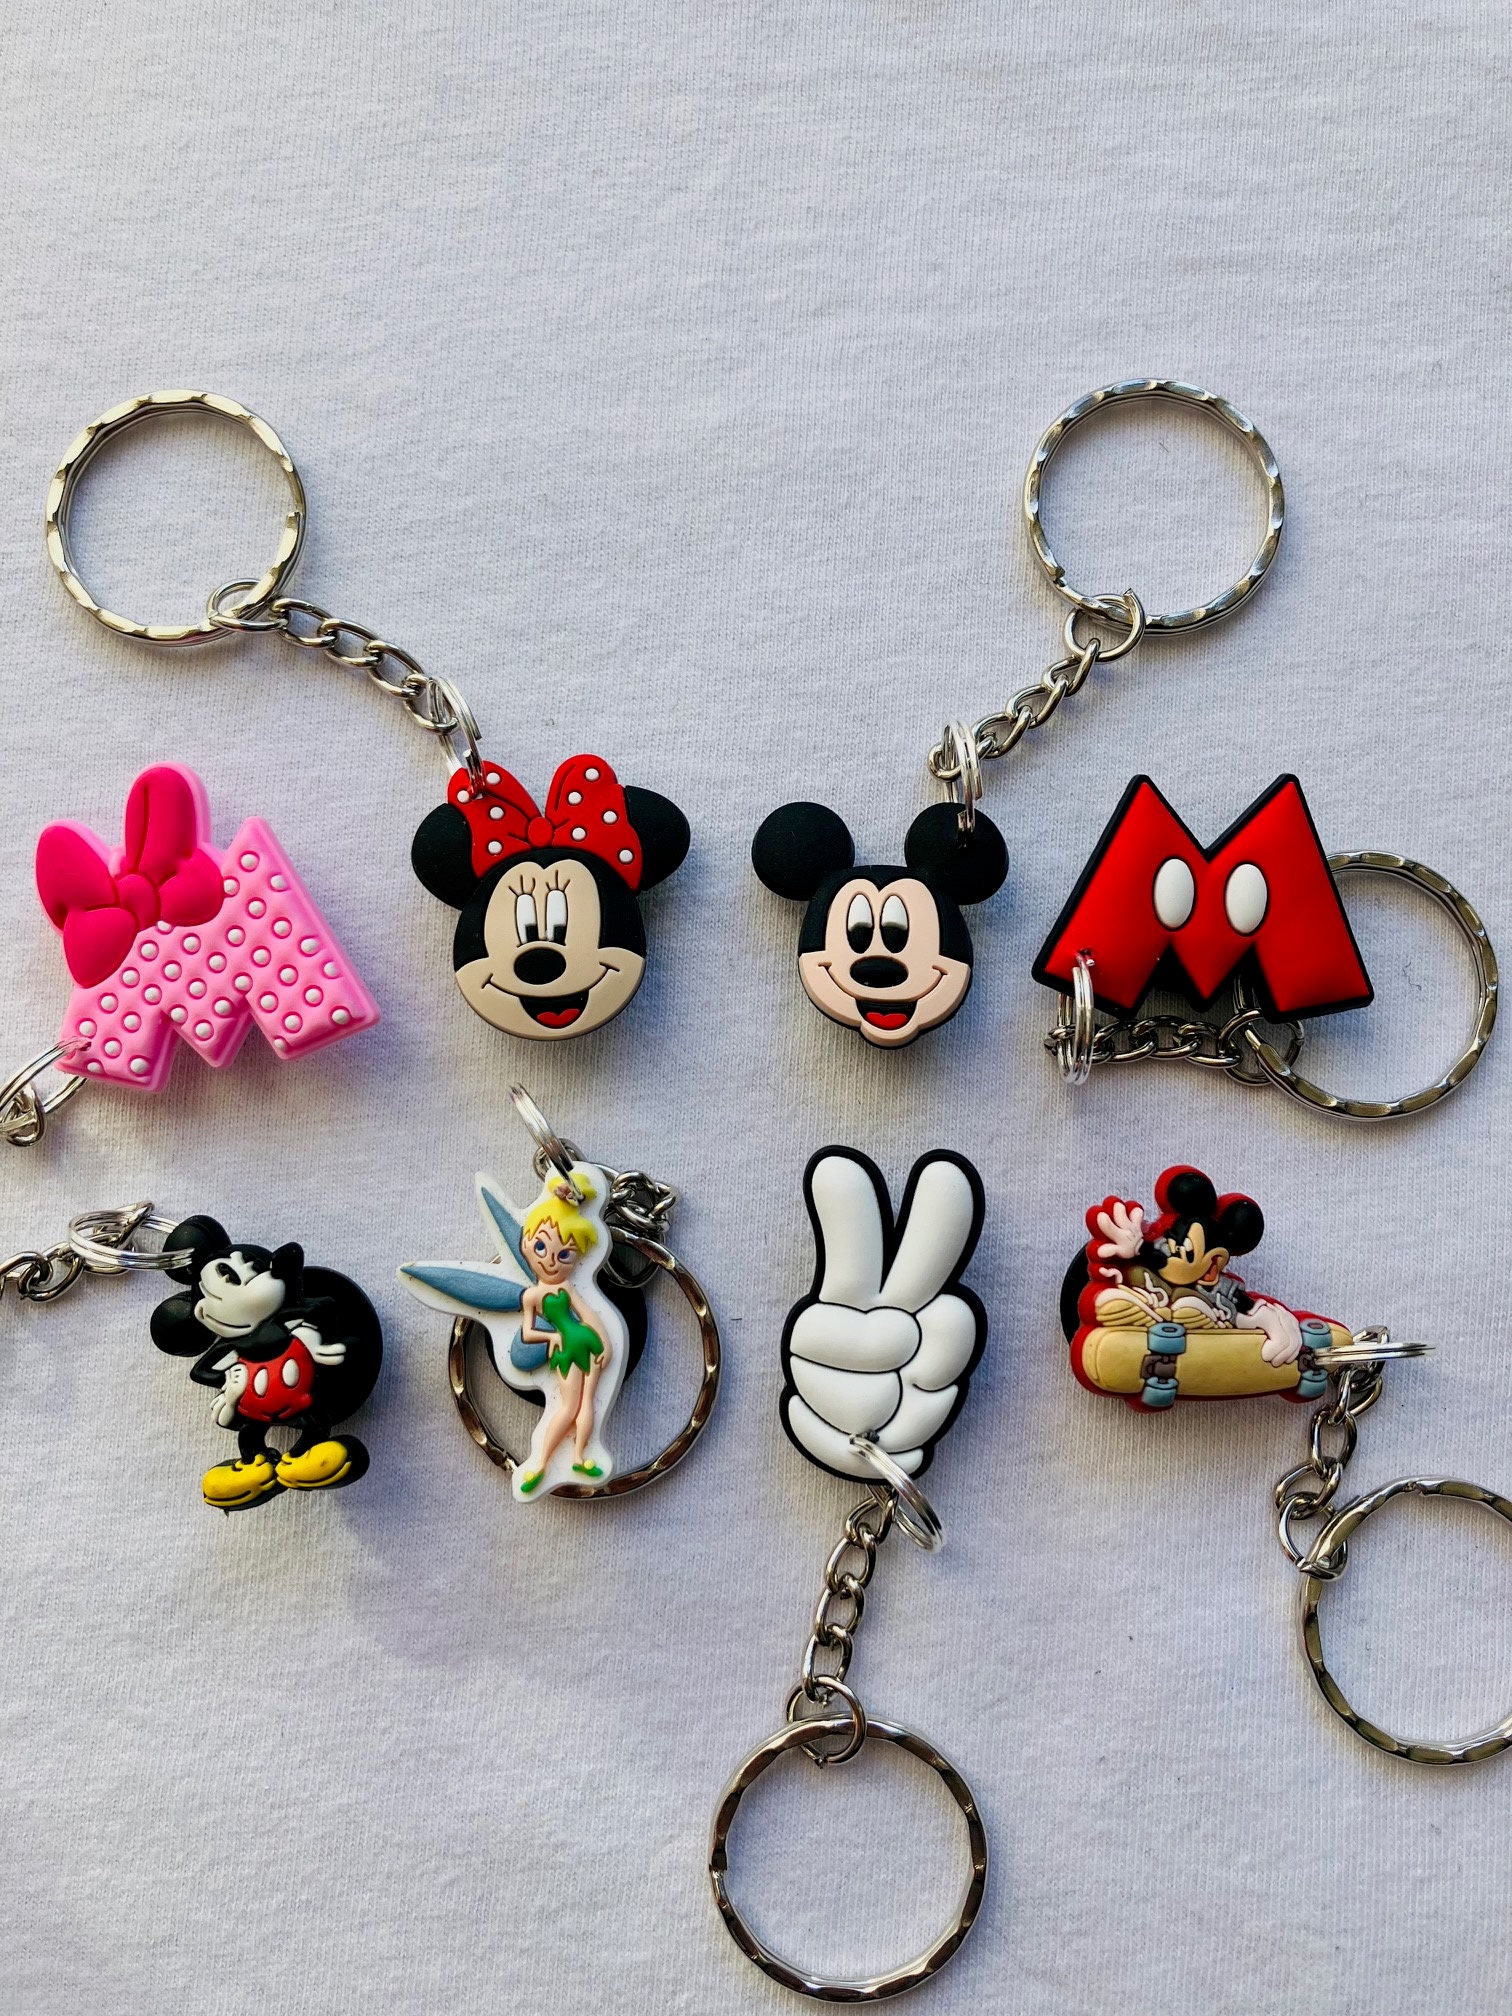 Mickey Mouse Keychain - NEW Vintage 80s Classic Mickey's Stuff for